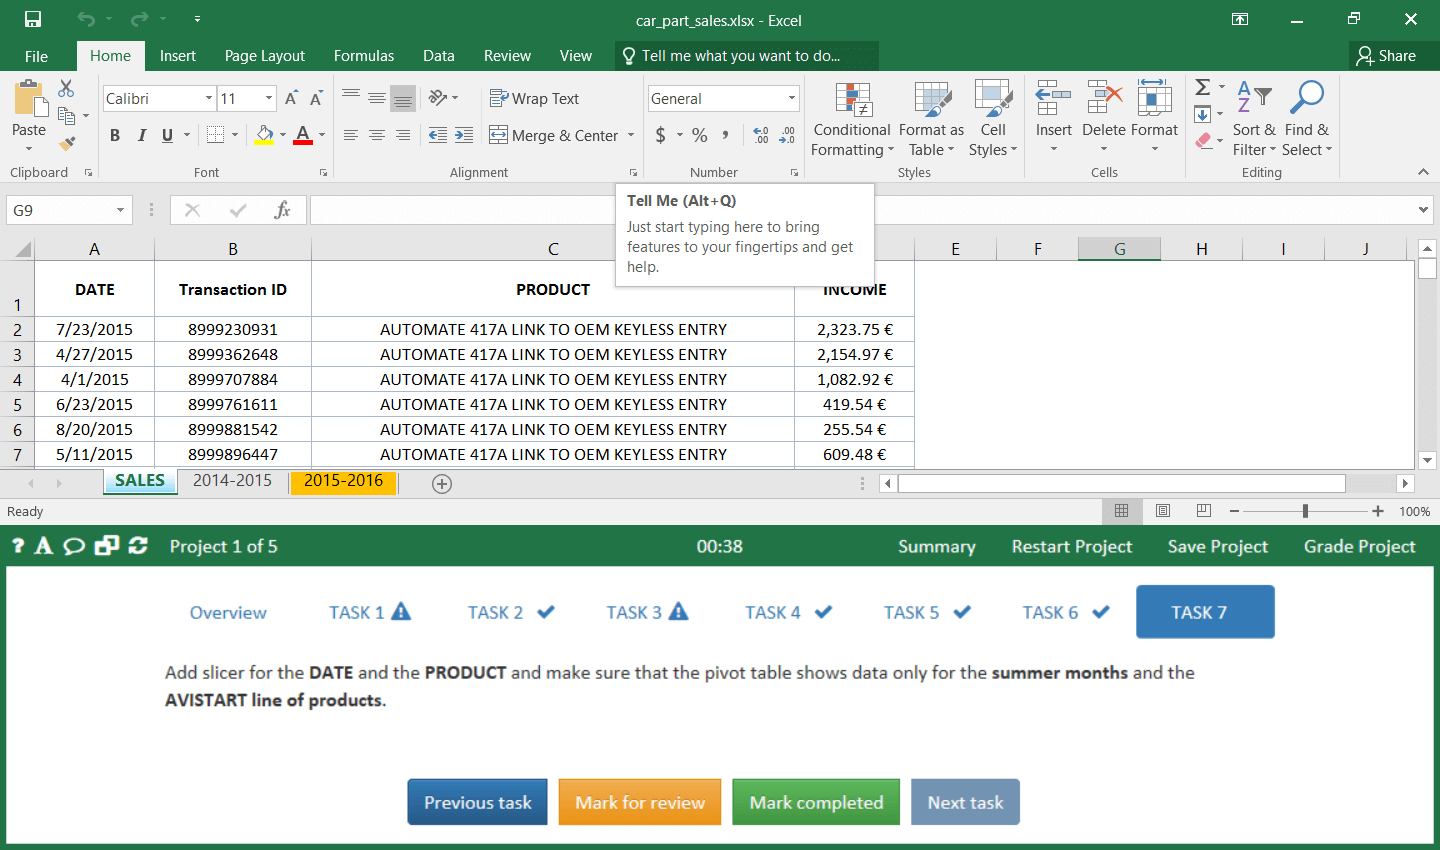 excel 2016 free download for windows 8.1